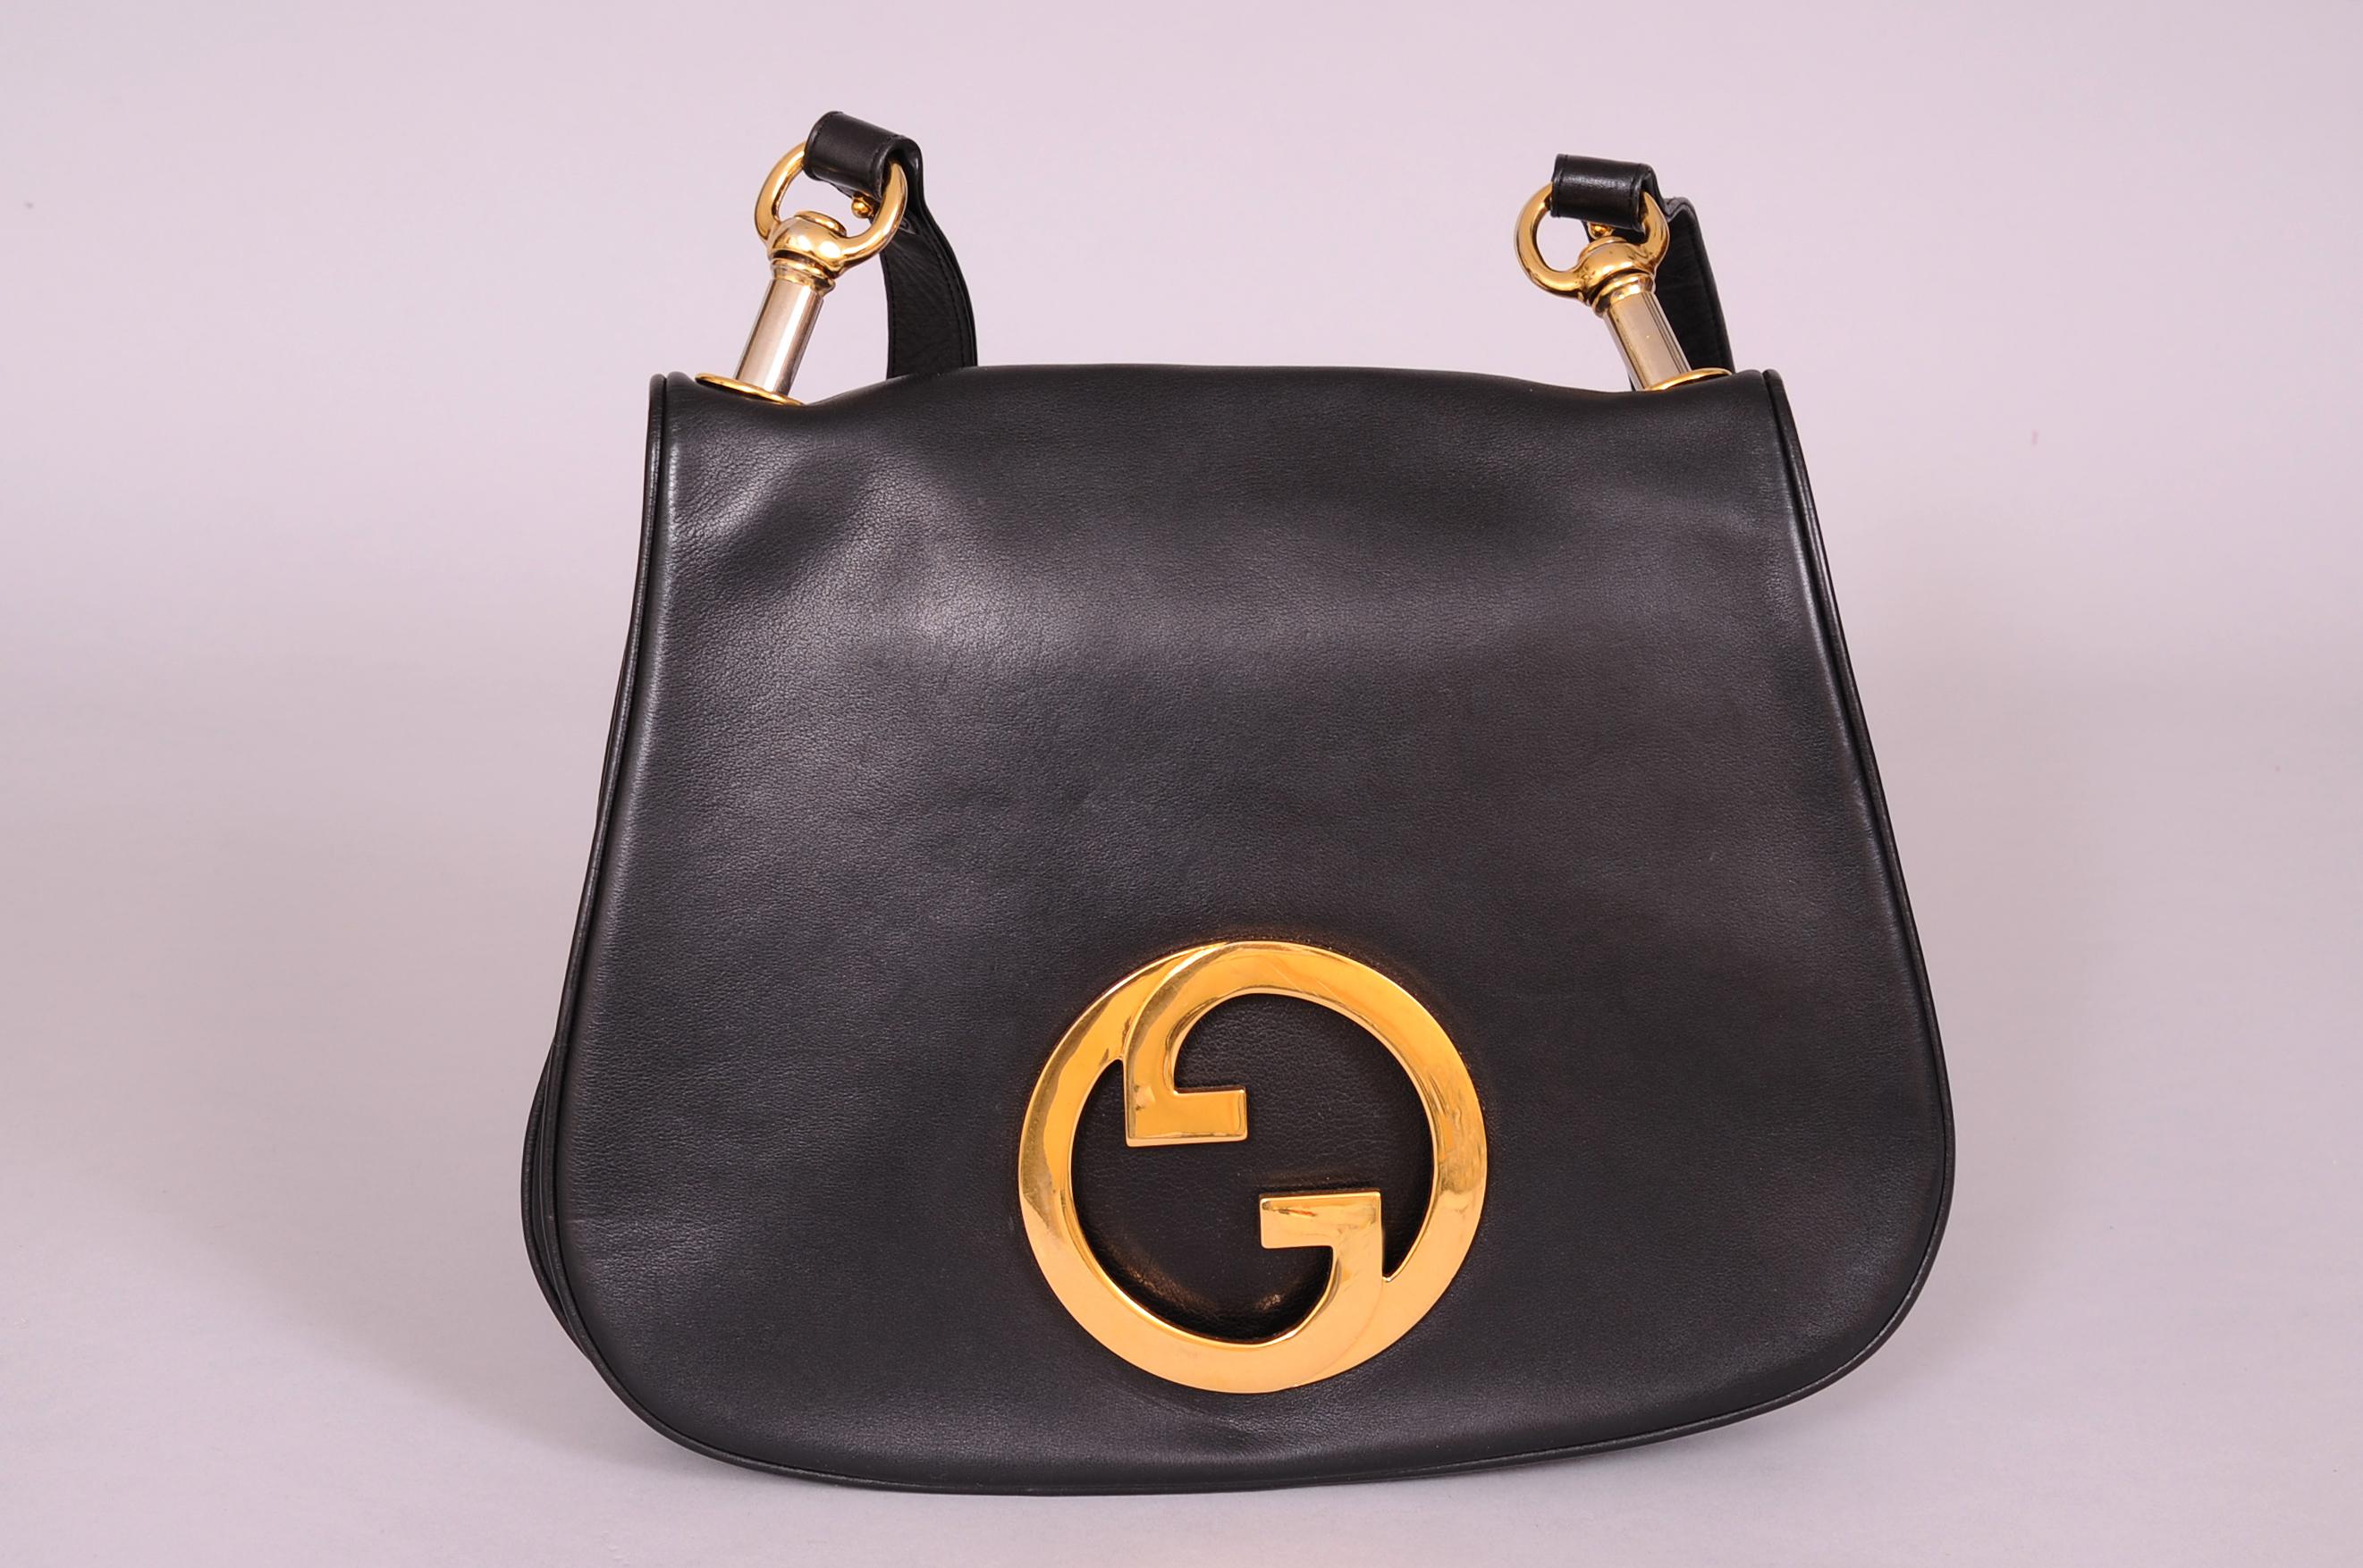 The iconic Gucci gold toned intertwined double G logo is front and center on this supple black leather Blondie bag from the 1970's.  The soft black leather bag has a black leather shoulder strap with a gold toned buckle to adjust the length. Two